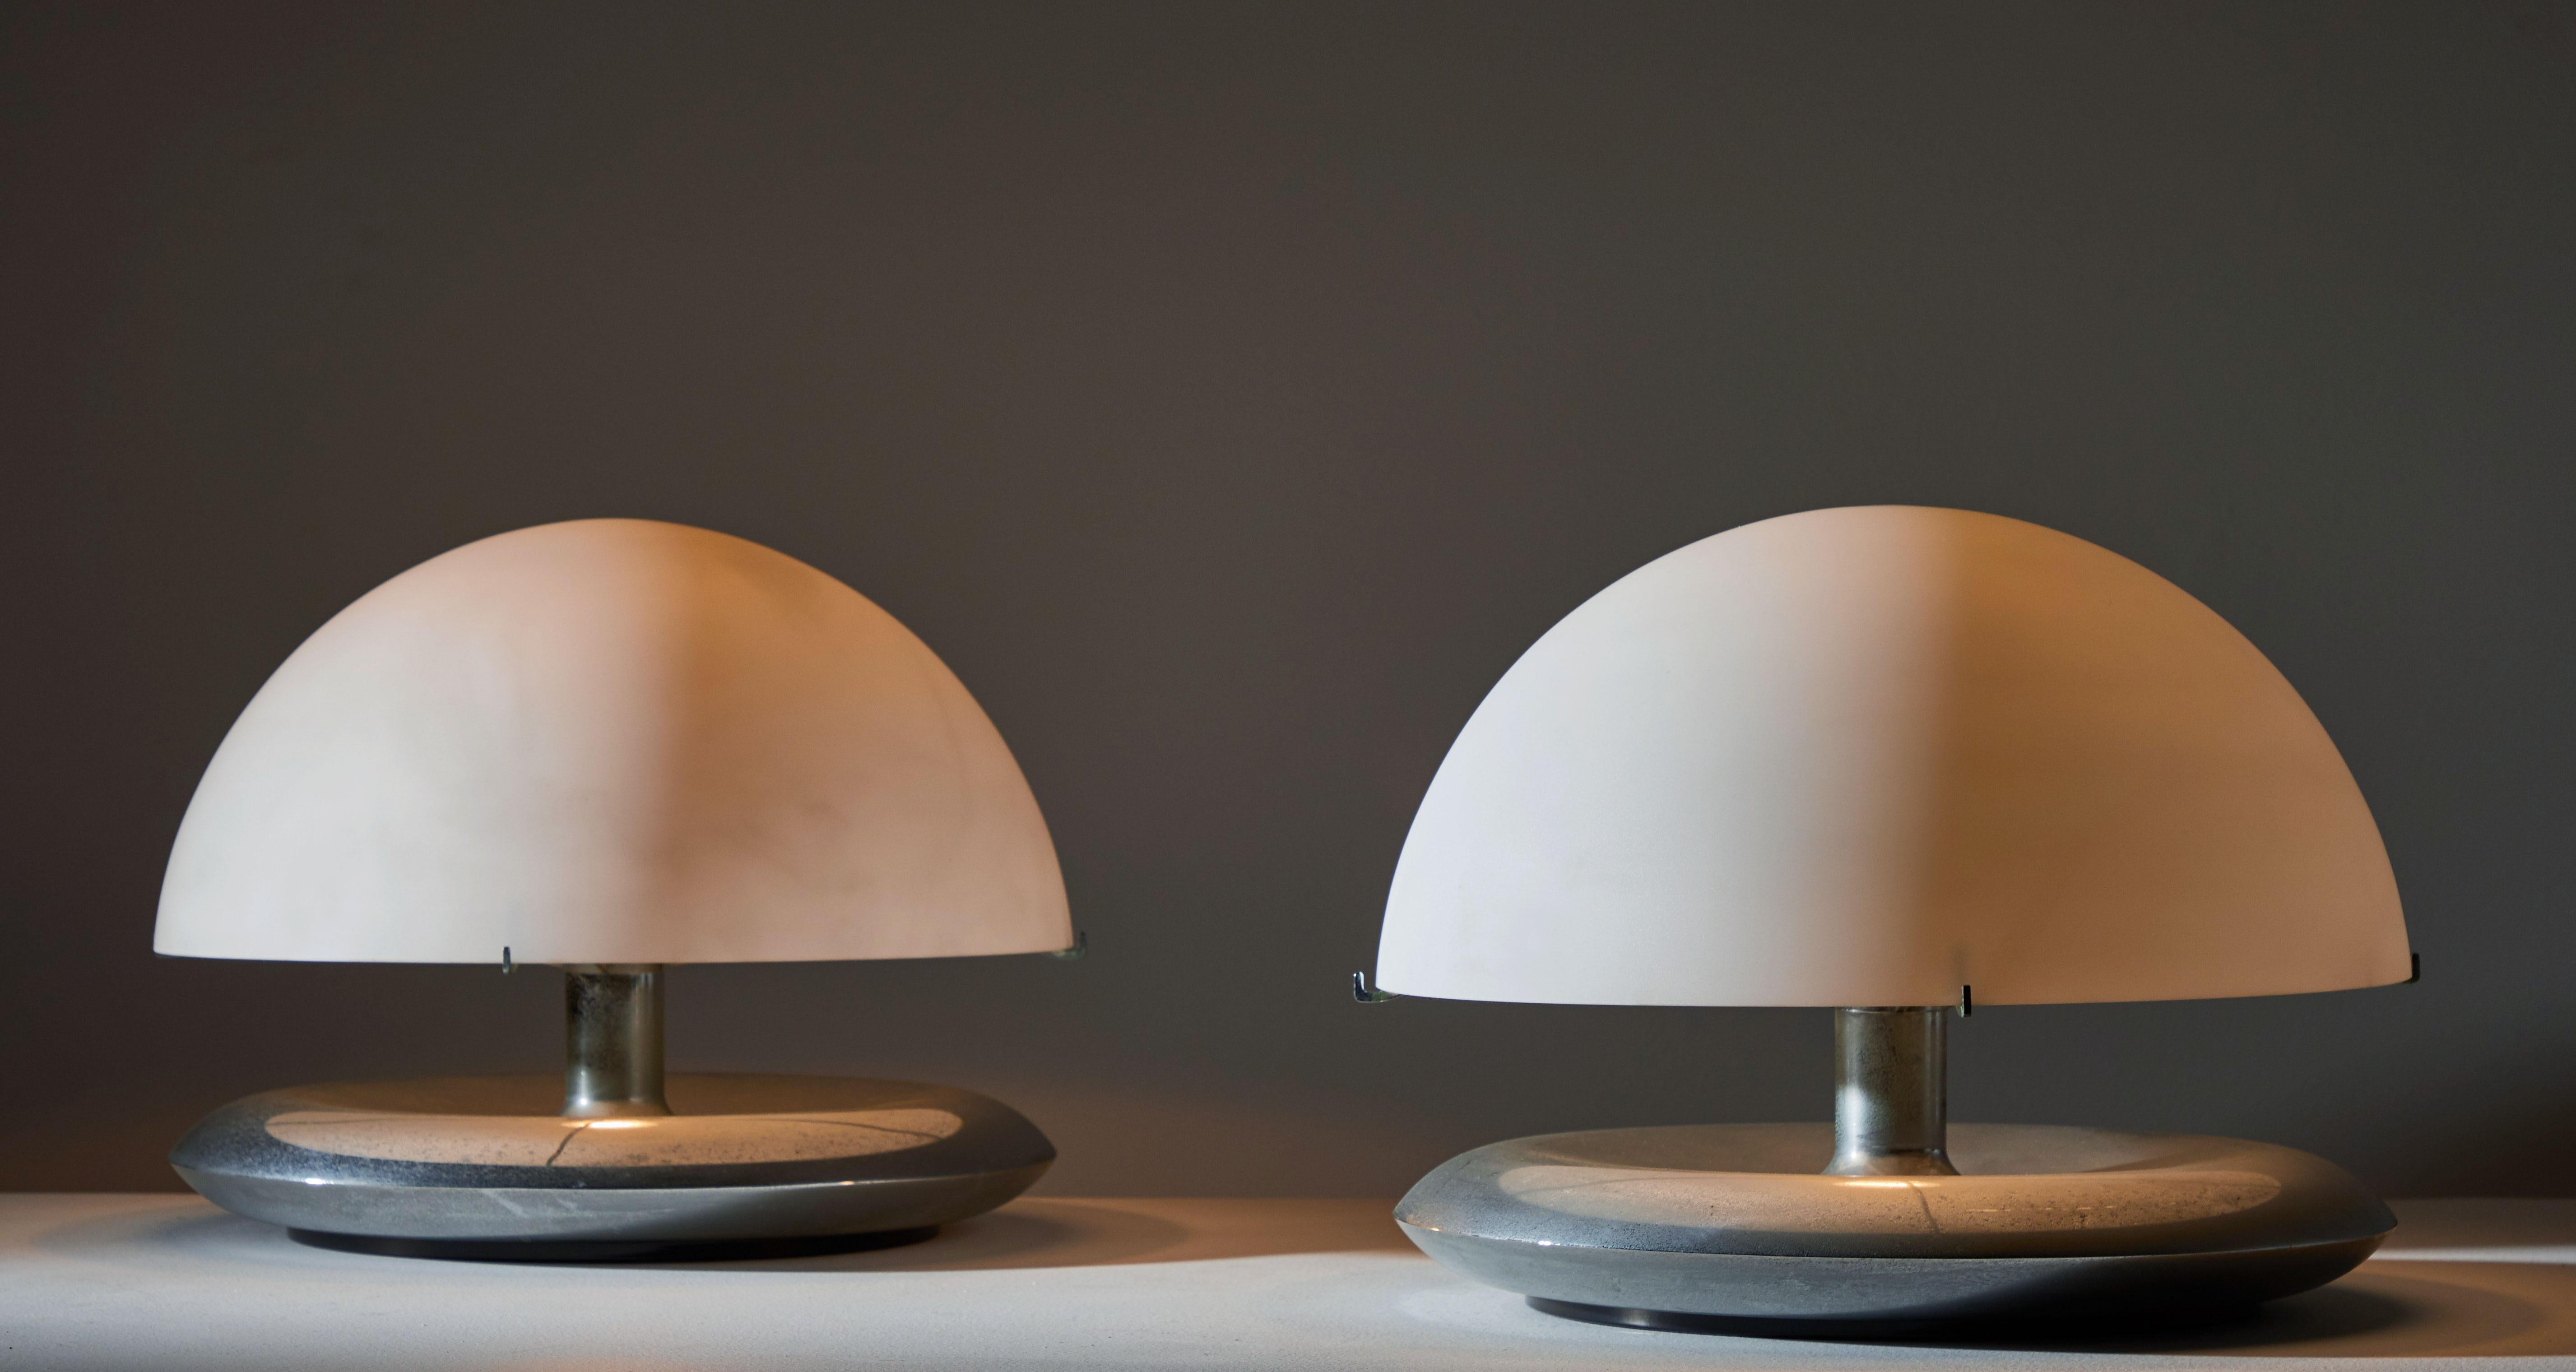 Pair of table lamps. Manufactured in Italy for Venini, circa 1970s. Opaline glass diffusers, with nickel plated brass base. Original cord with on/off hand switch. Takes one E26 75w maximum bulb.